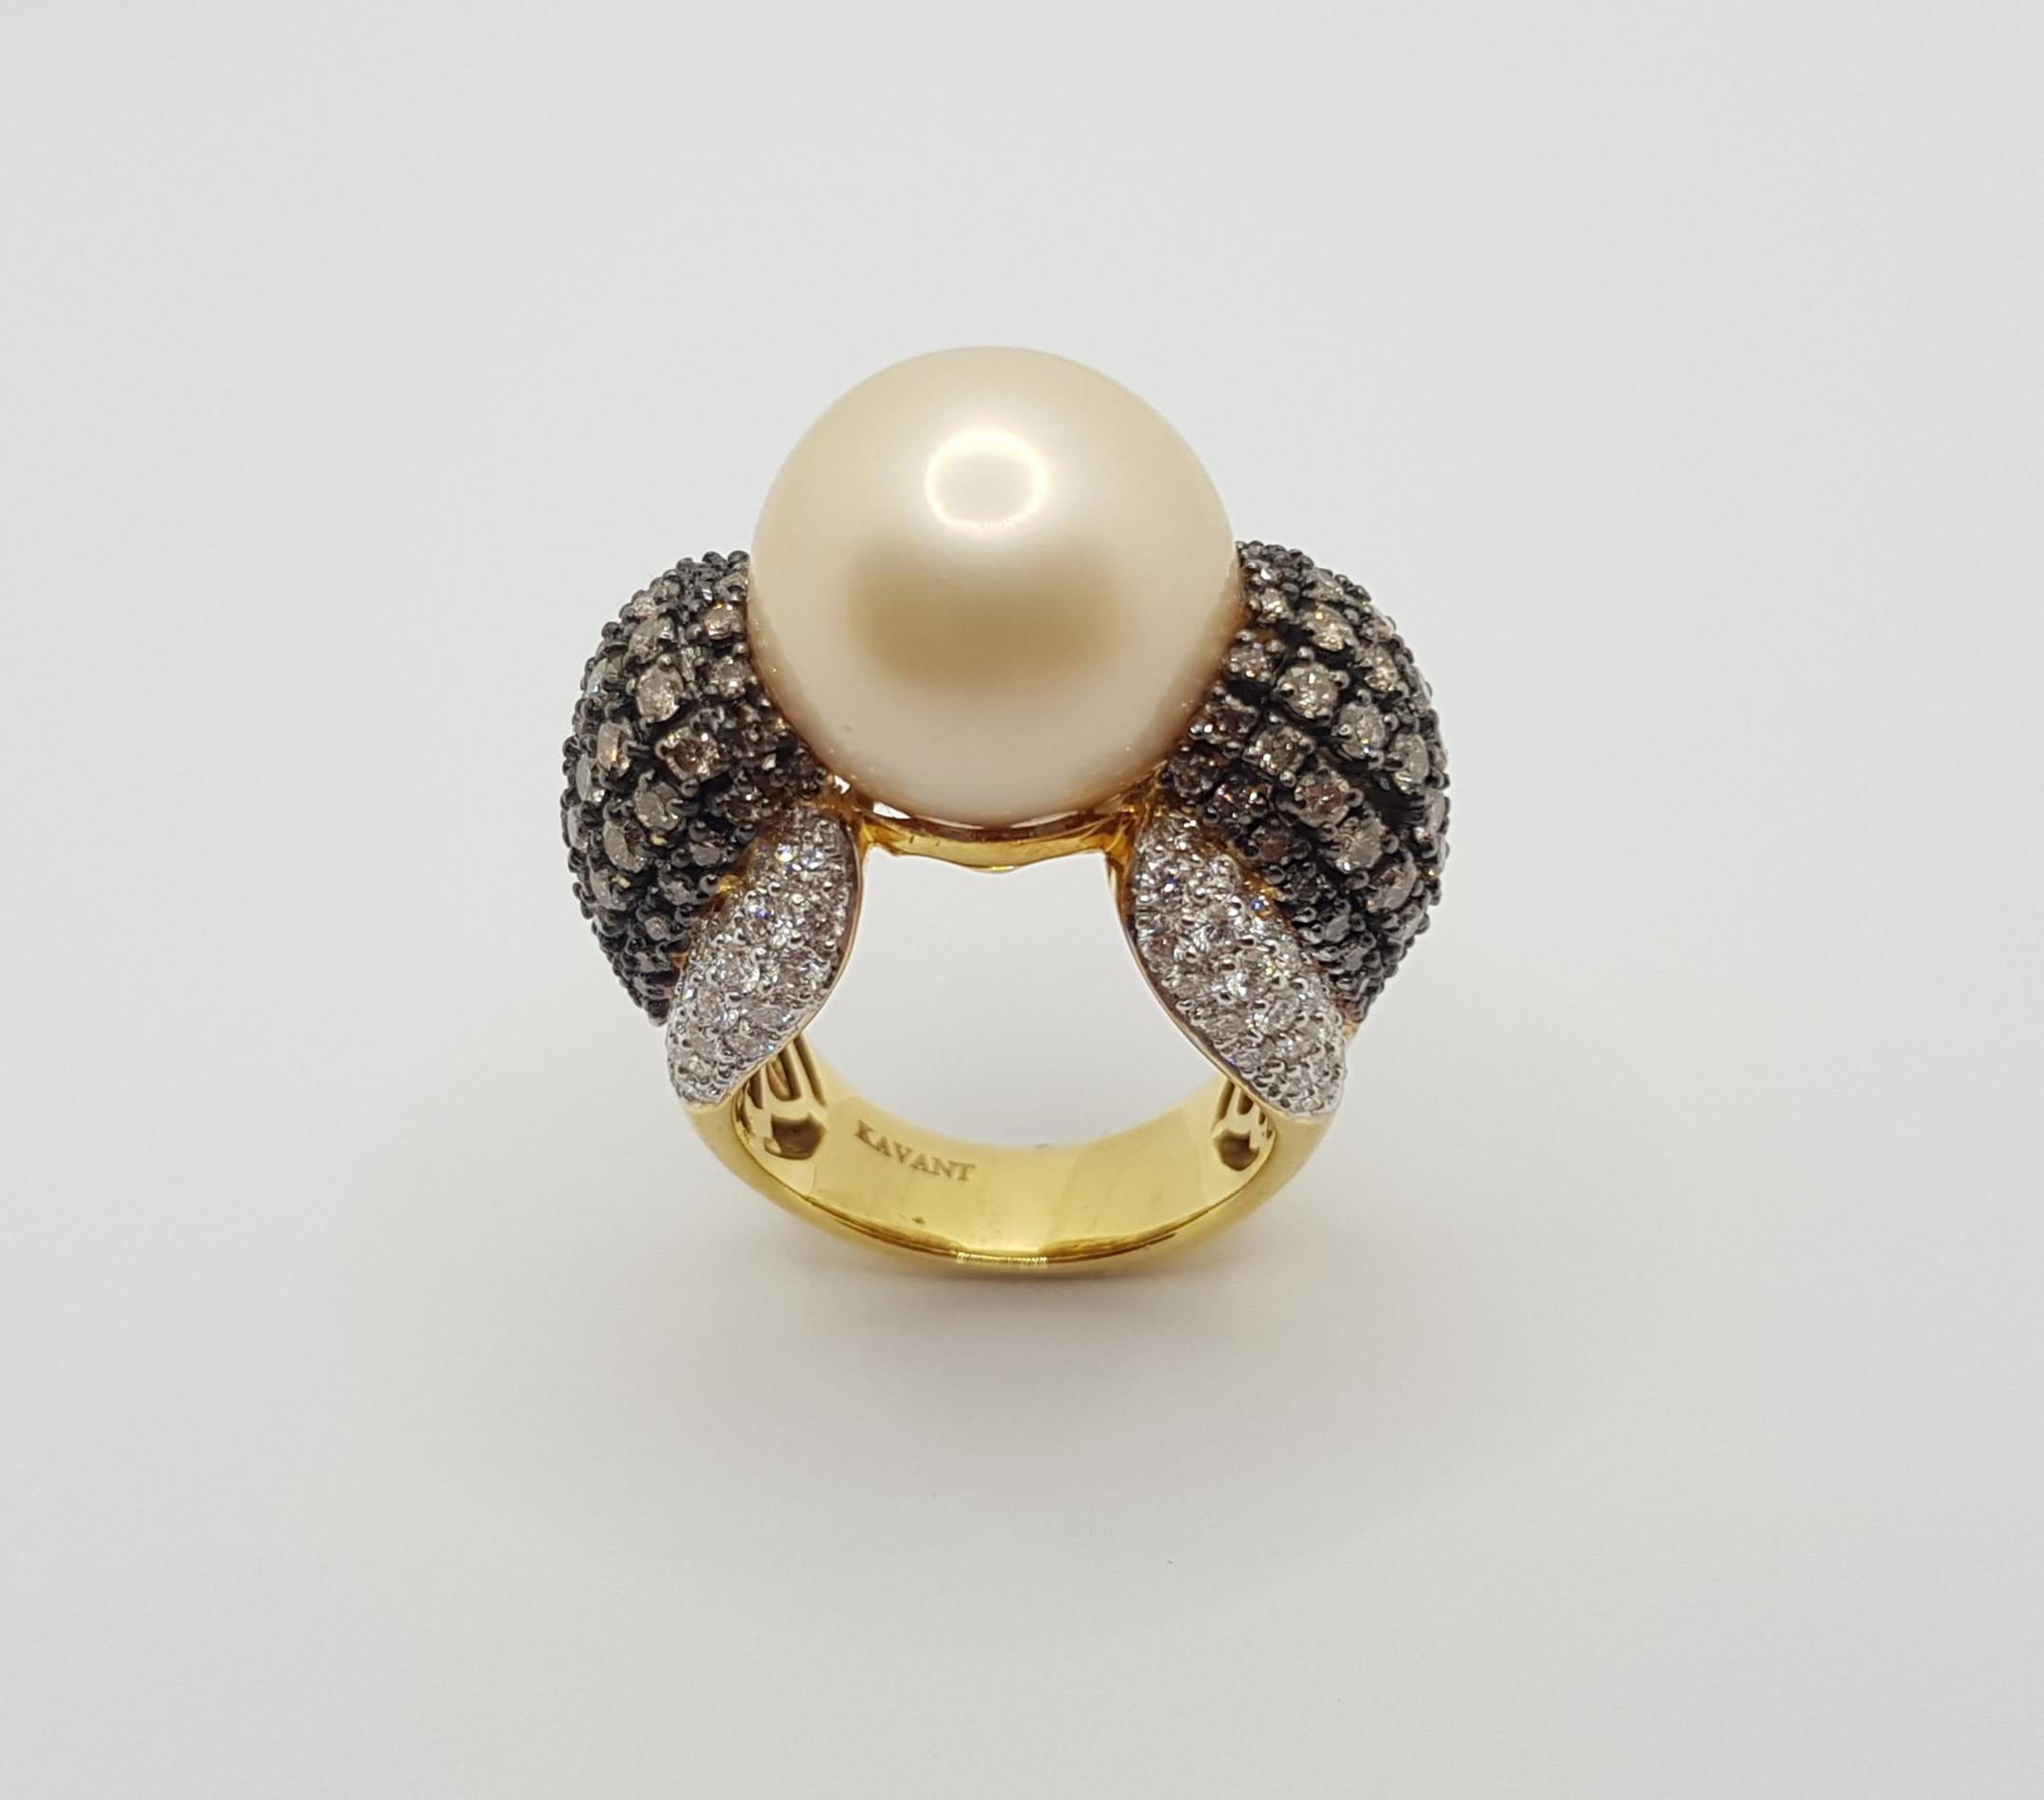 Golden South Sea Pearl with Brown Diamond and Diamond Ring Set in 18 Karat Gold For Sale 3